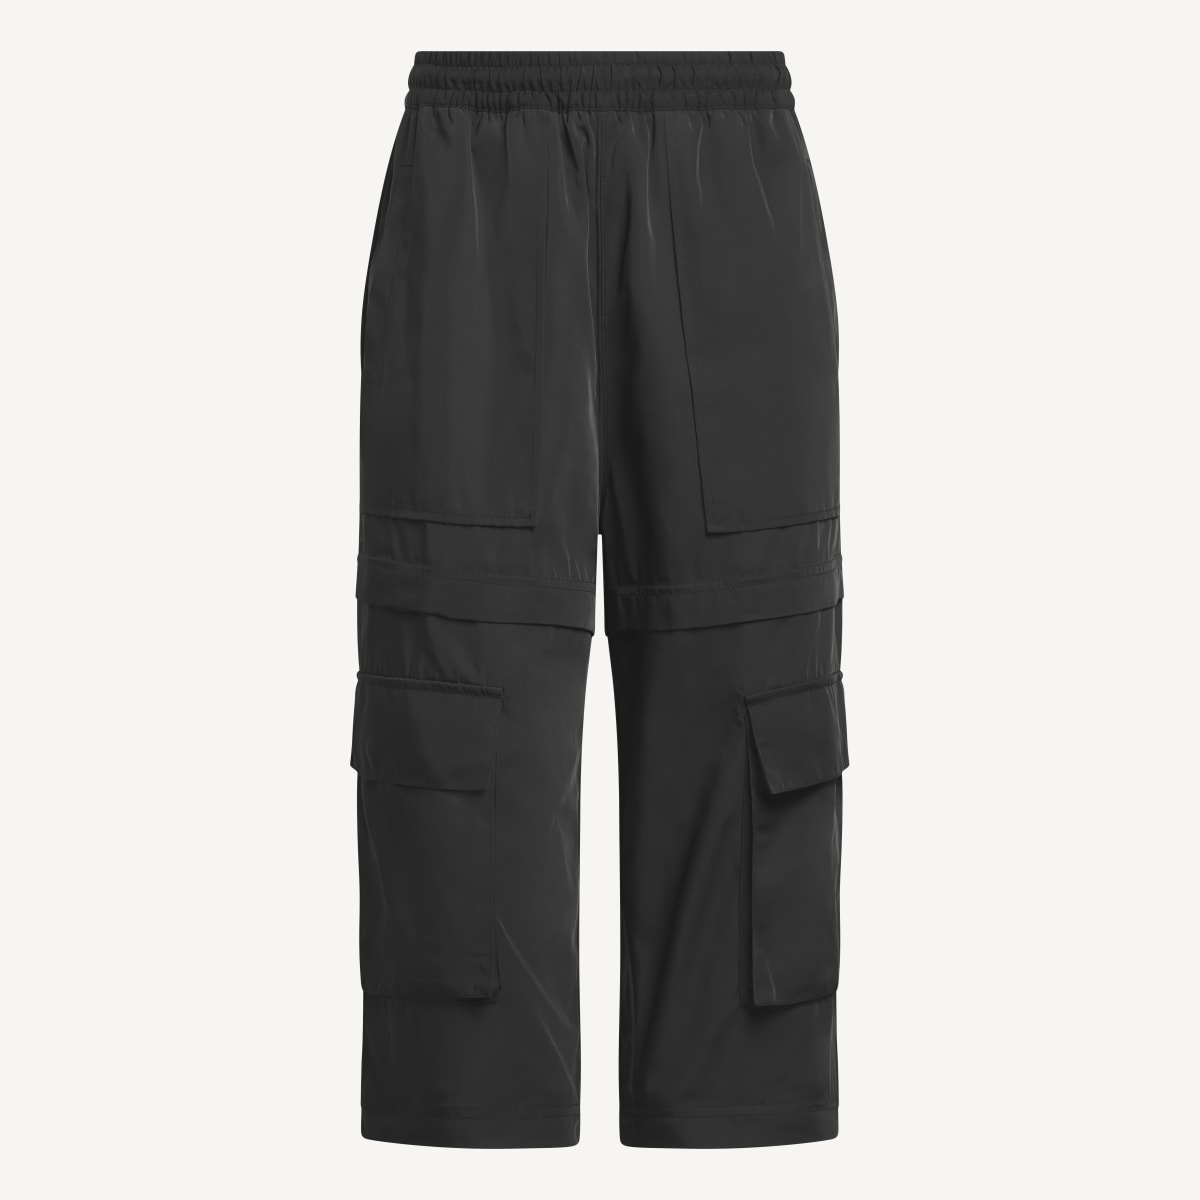 Adidas 3-in-1 Track Pants (All Gender). 7